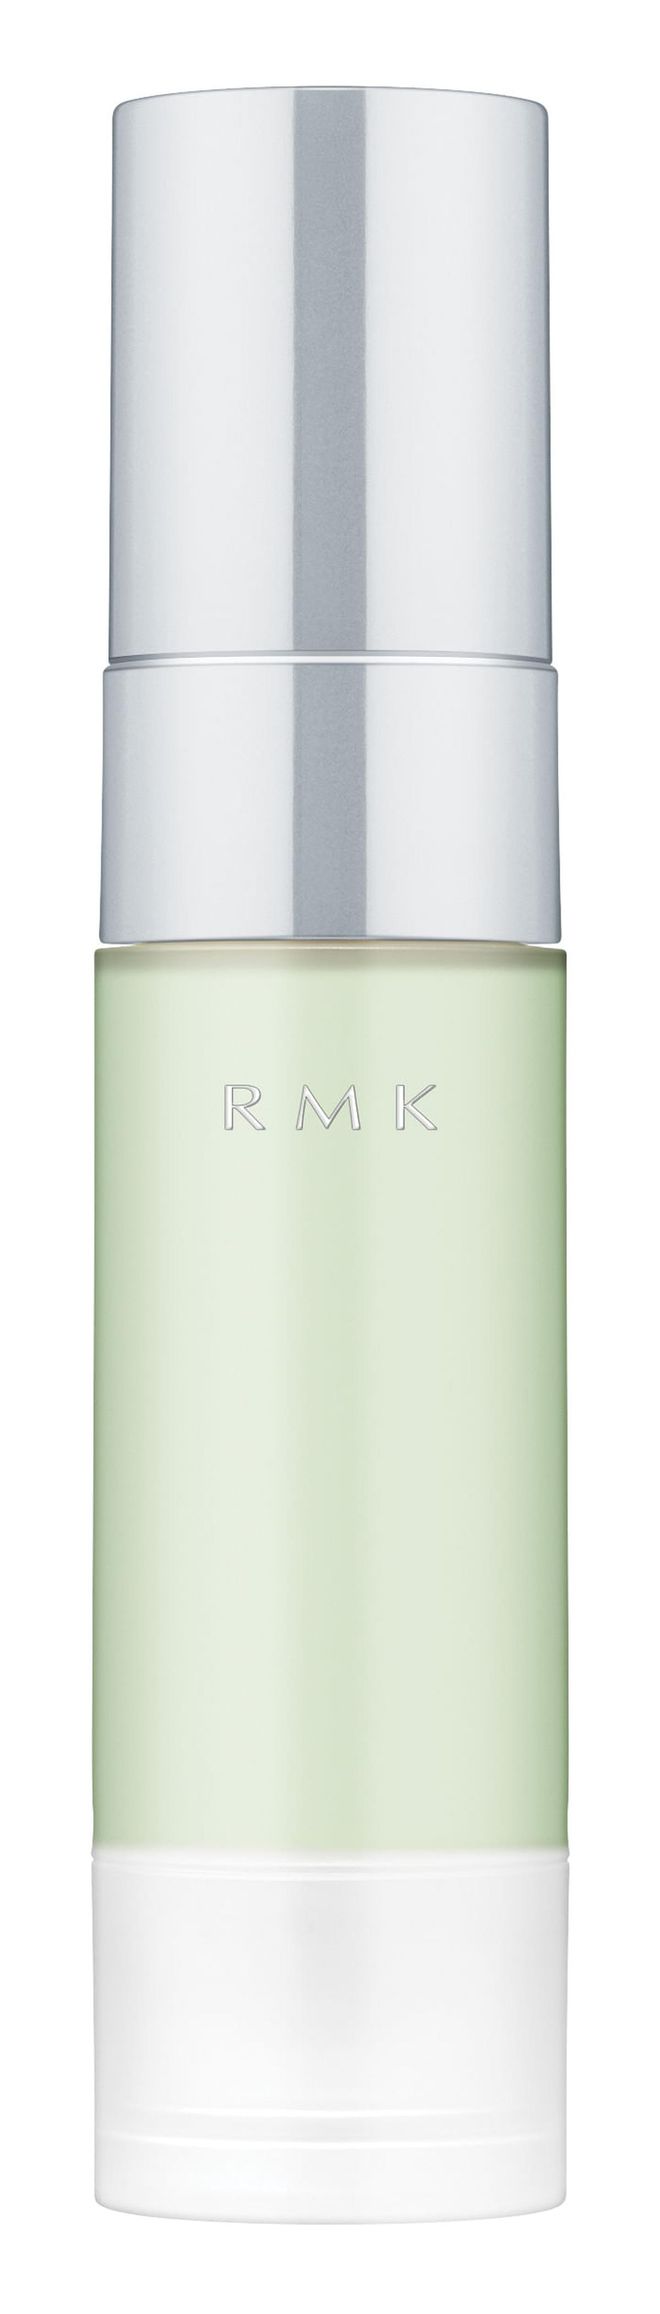 A radiant, even-toned complexion is within reach with RMK’s Basic Control Color. Available in four different shades to target a multitude of discolourations, the lightweight and silky texture also helps smooth skin surface. Designed to counter redness, 
the Basic Control Color #03 Green features a slight green tint to cancel out redness for those who are prone to looking flushed. In addition, try #01 Silver for added luminosity, #02 Purple to correct sallowness or #04 Coral for a healthy, rosy glow that flatters all skin tones. 